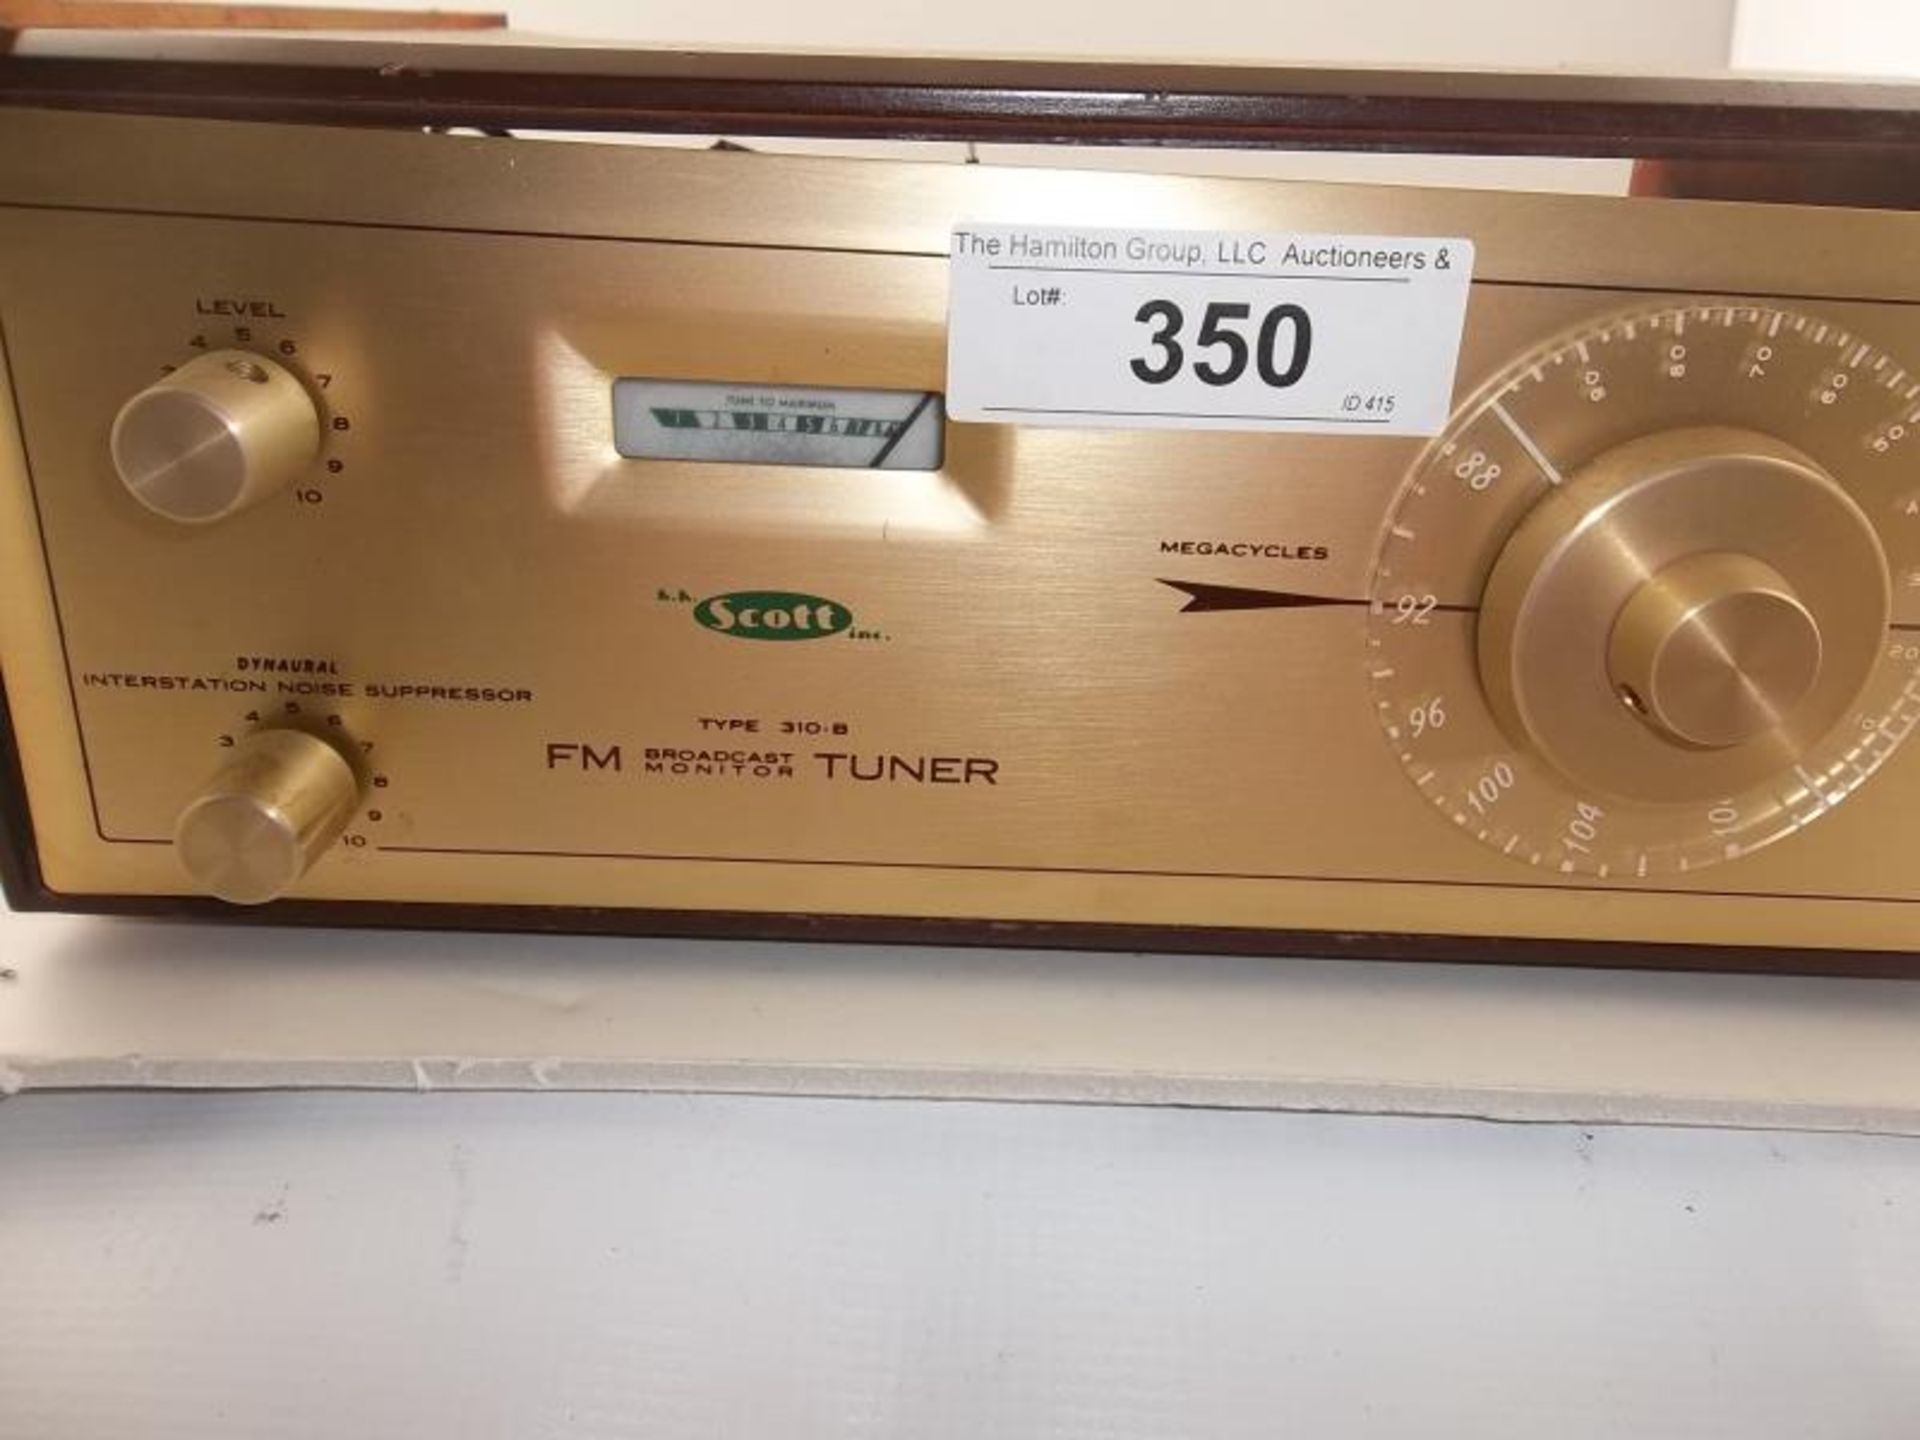 Scott FM Tuner type 310-B, s#26641, wood case broken and scratched, not tested